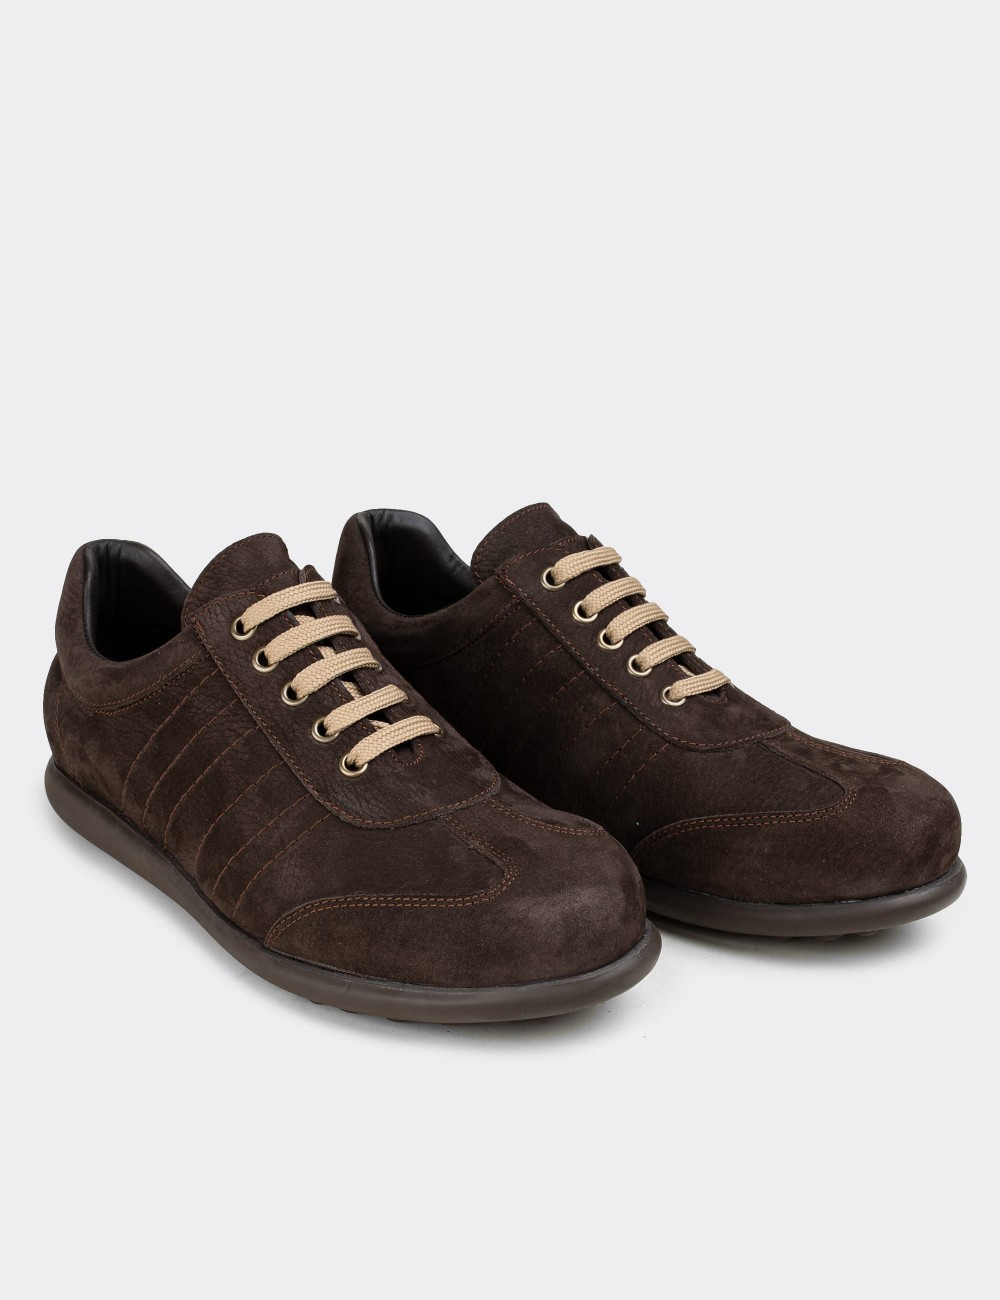 Brown Nubuck Leather Lace-up Shoes - 01826MKHVC03